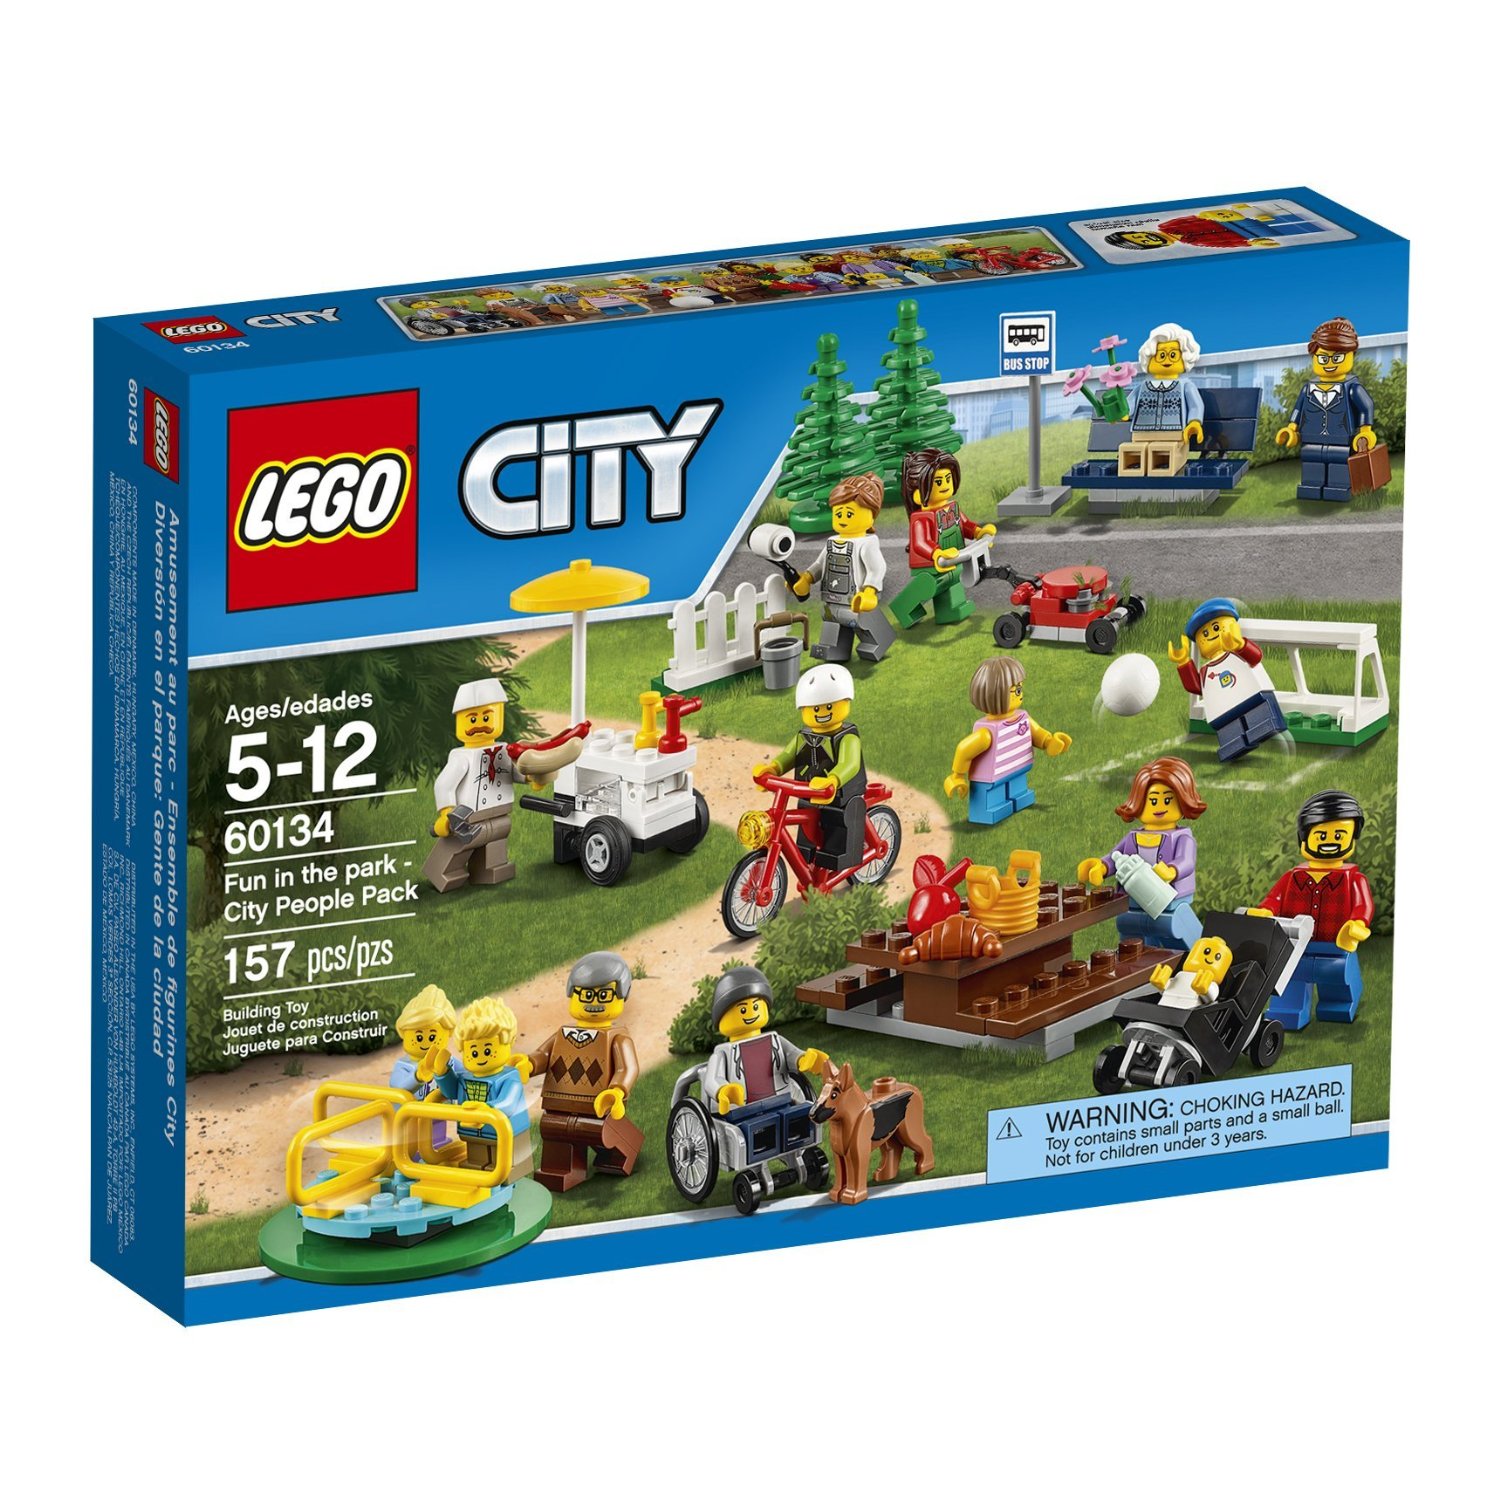 HOT! LEGO City Town Fun in the Park Building Kit Only $23.99! (Reg $39.99)